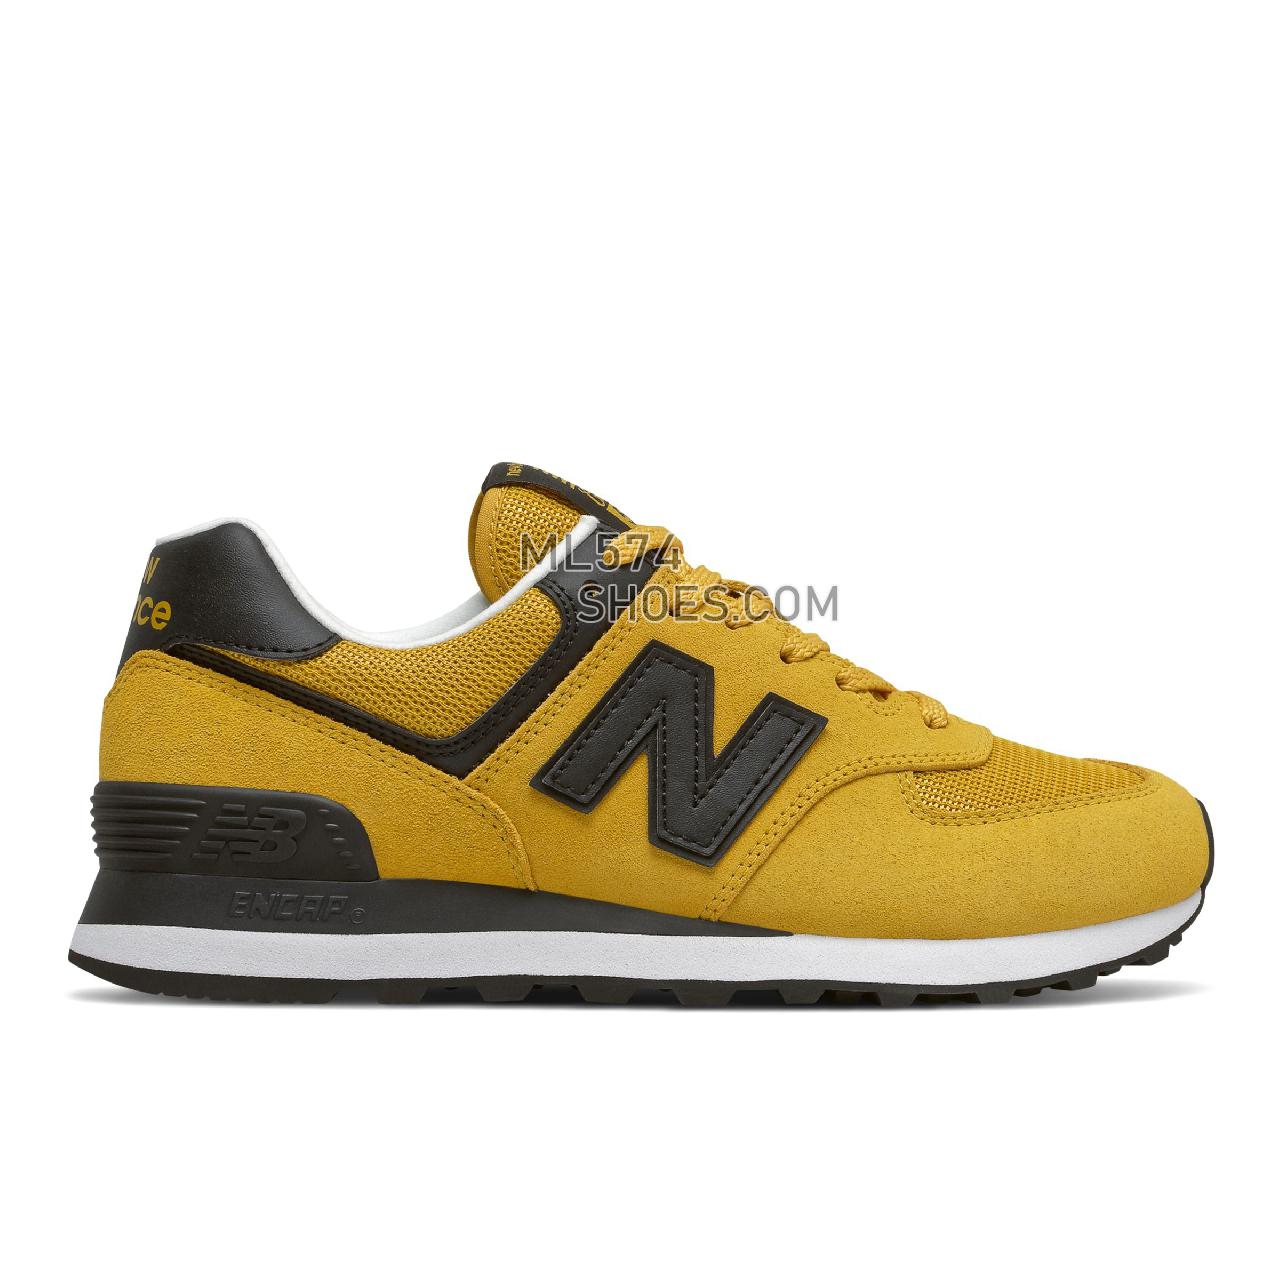 New Balance 574 - Women's Classic Sneakers - Harvest Gold with Black - WL574MC2